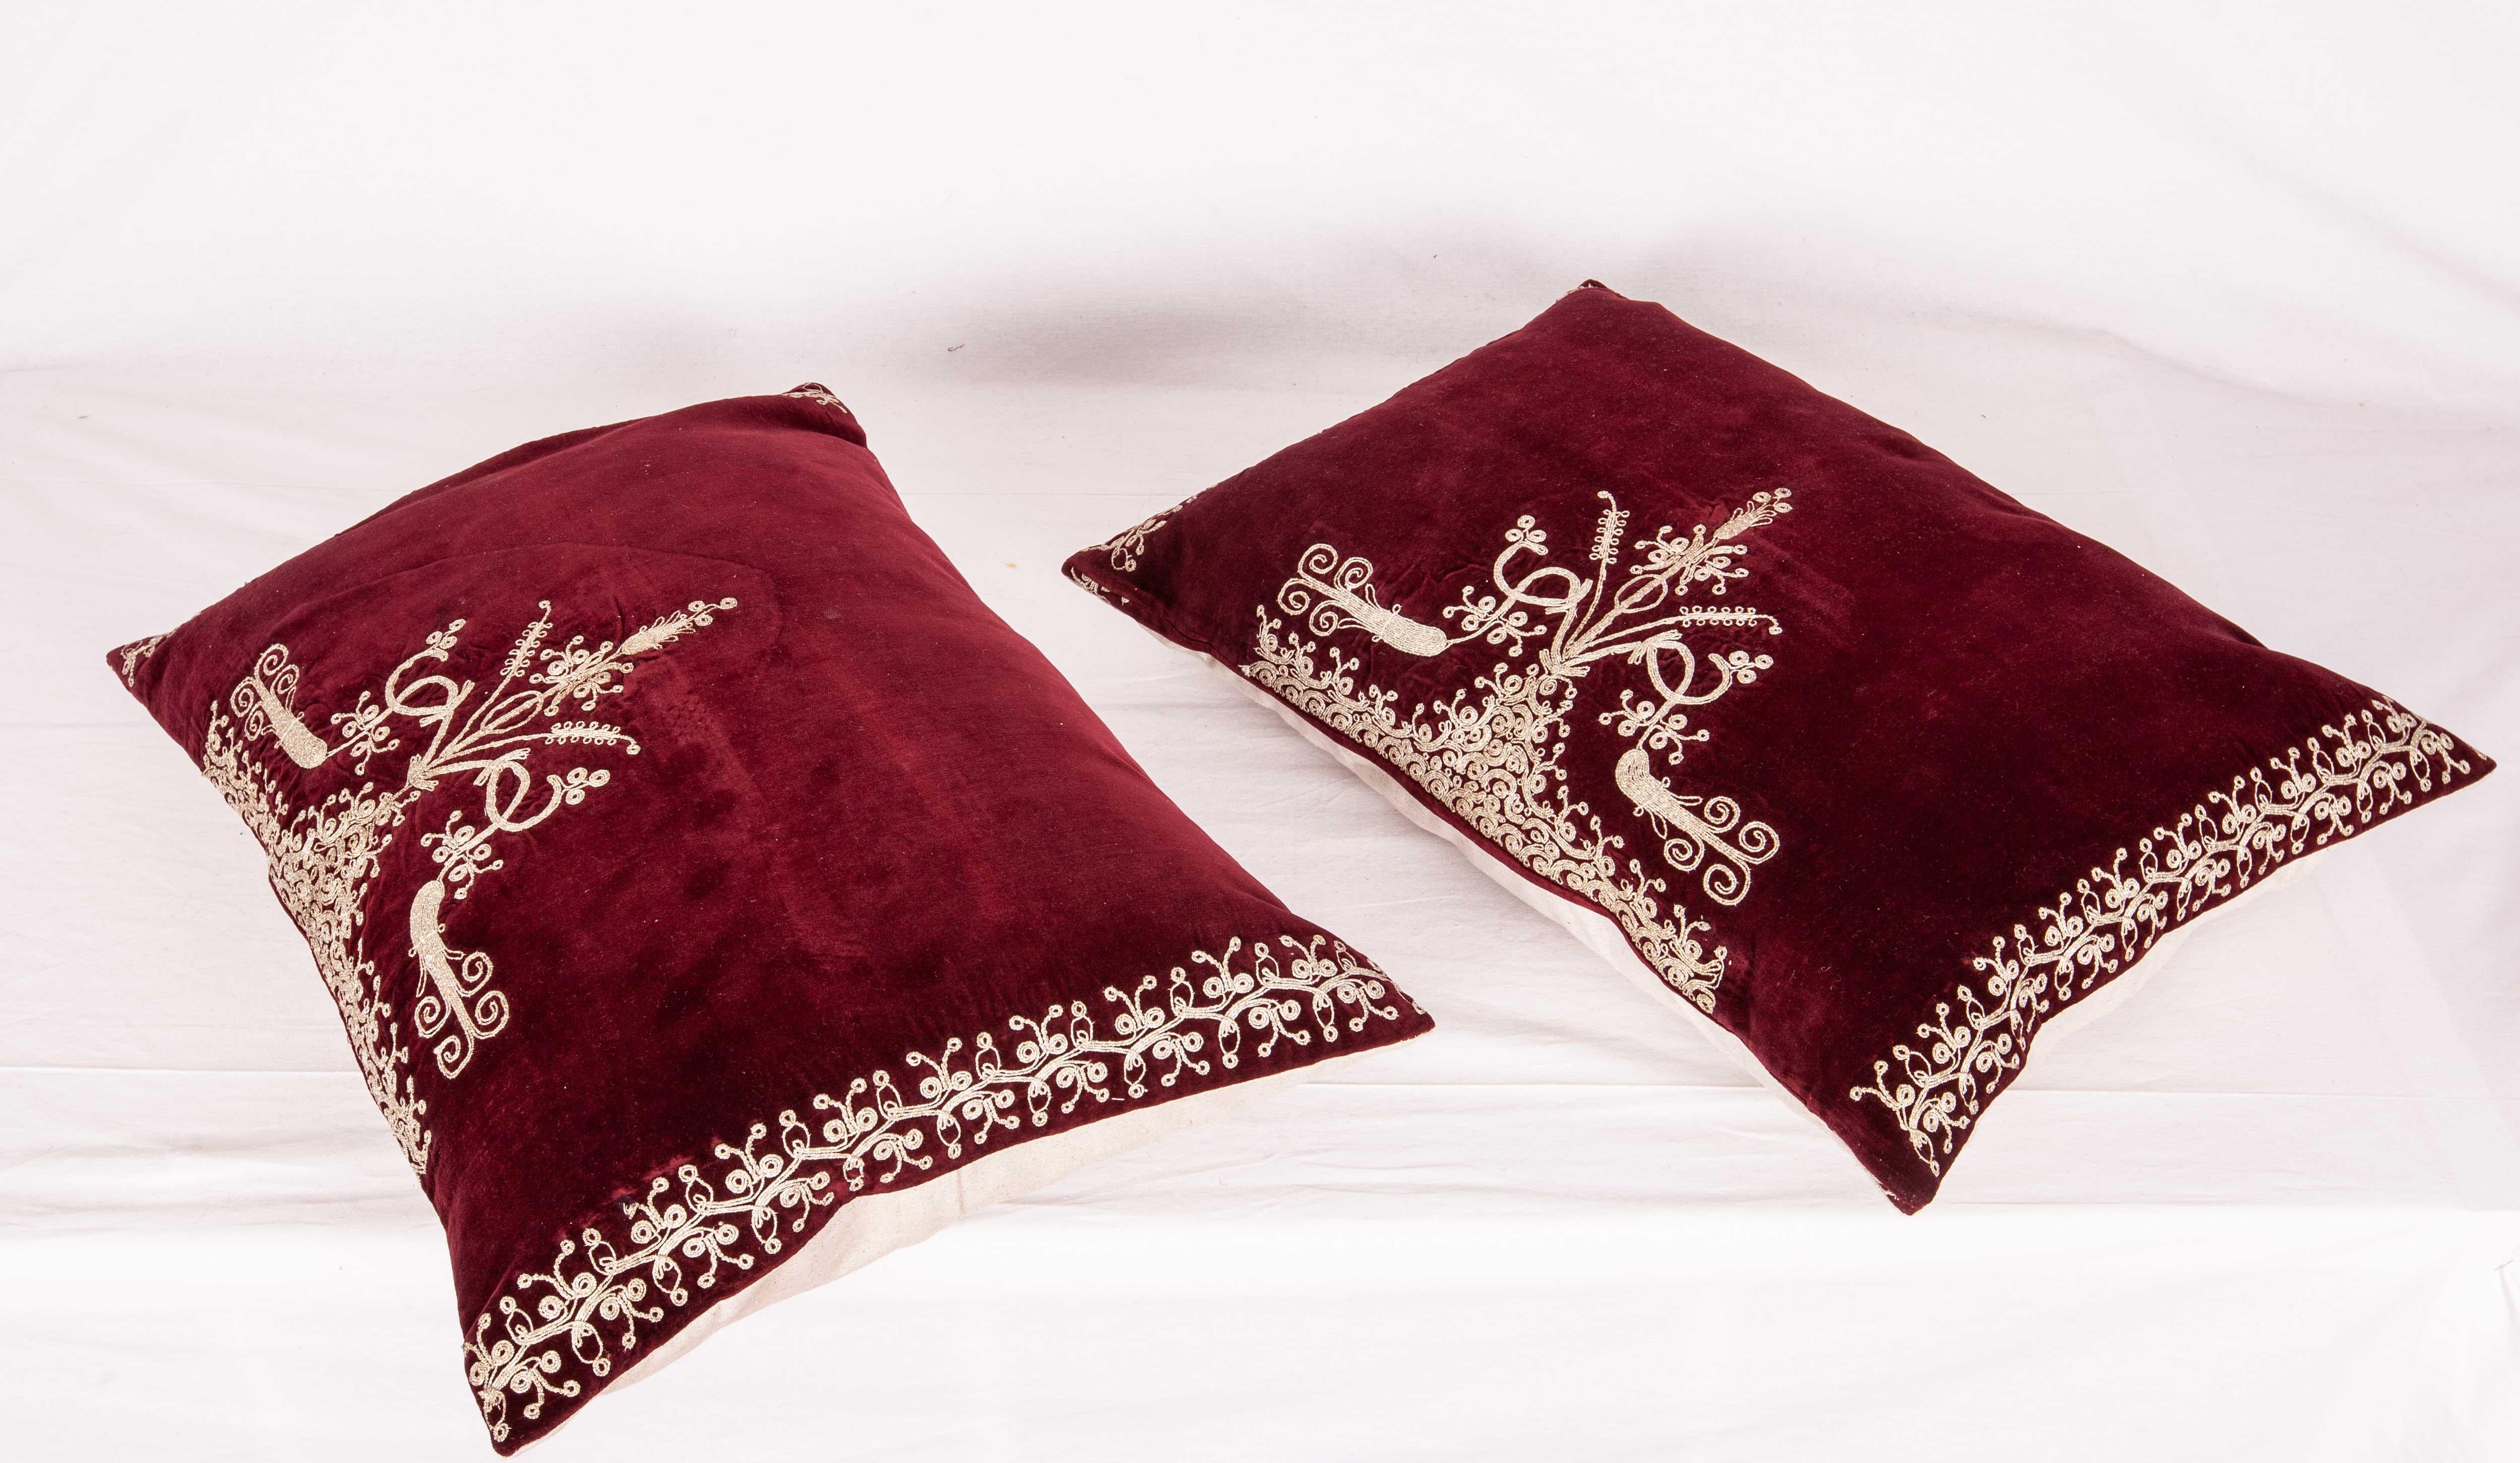 Embroidered Vintage Anatolian Velvet Pillow Cases, Mid-20th Century For Sale